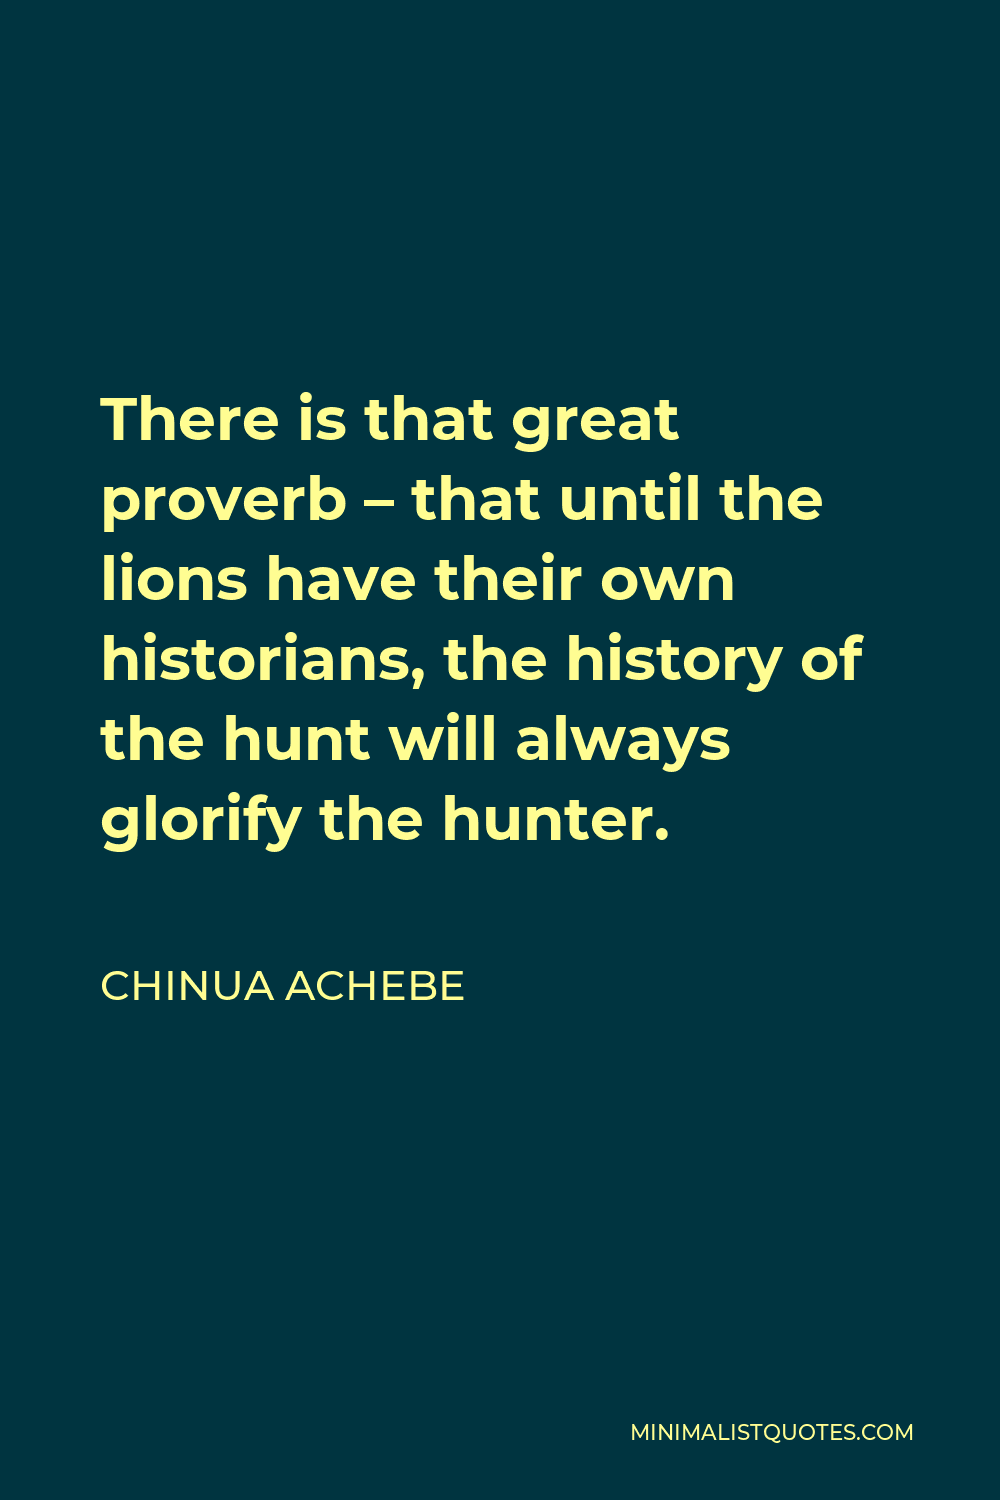 Chinua Achebe Quote - There is that great proverb – that until the lions have their own historians, the history of the hunt will always glorify the hunter.